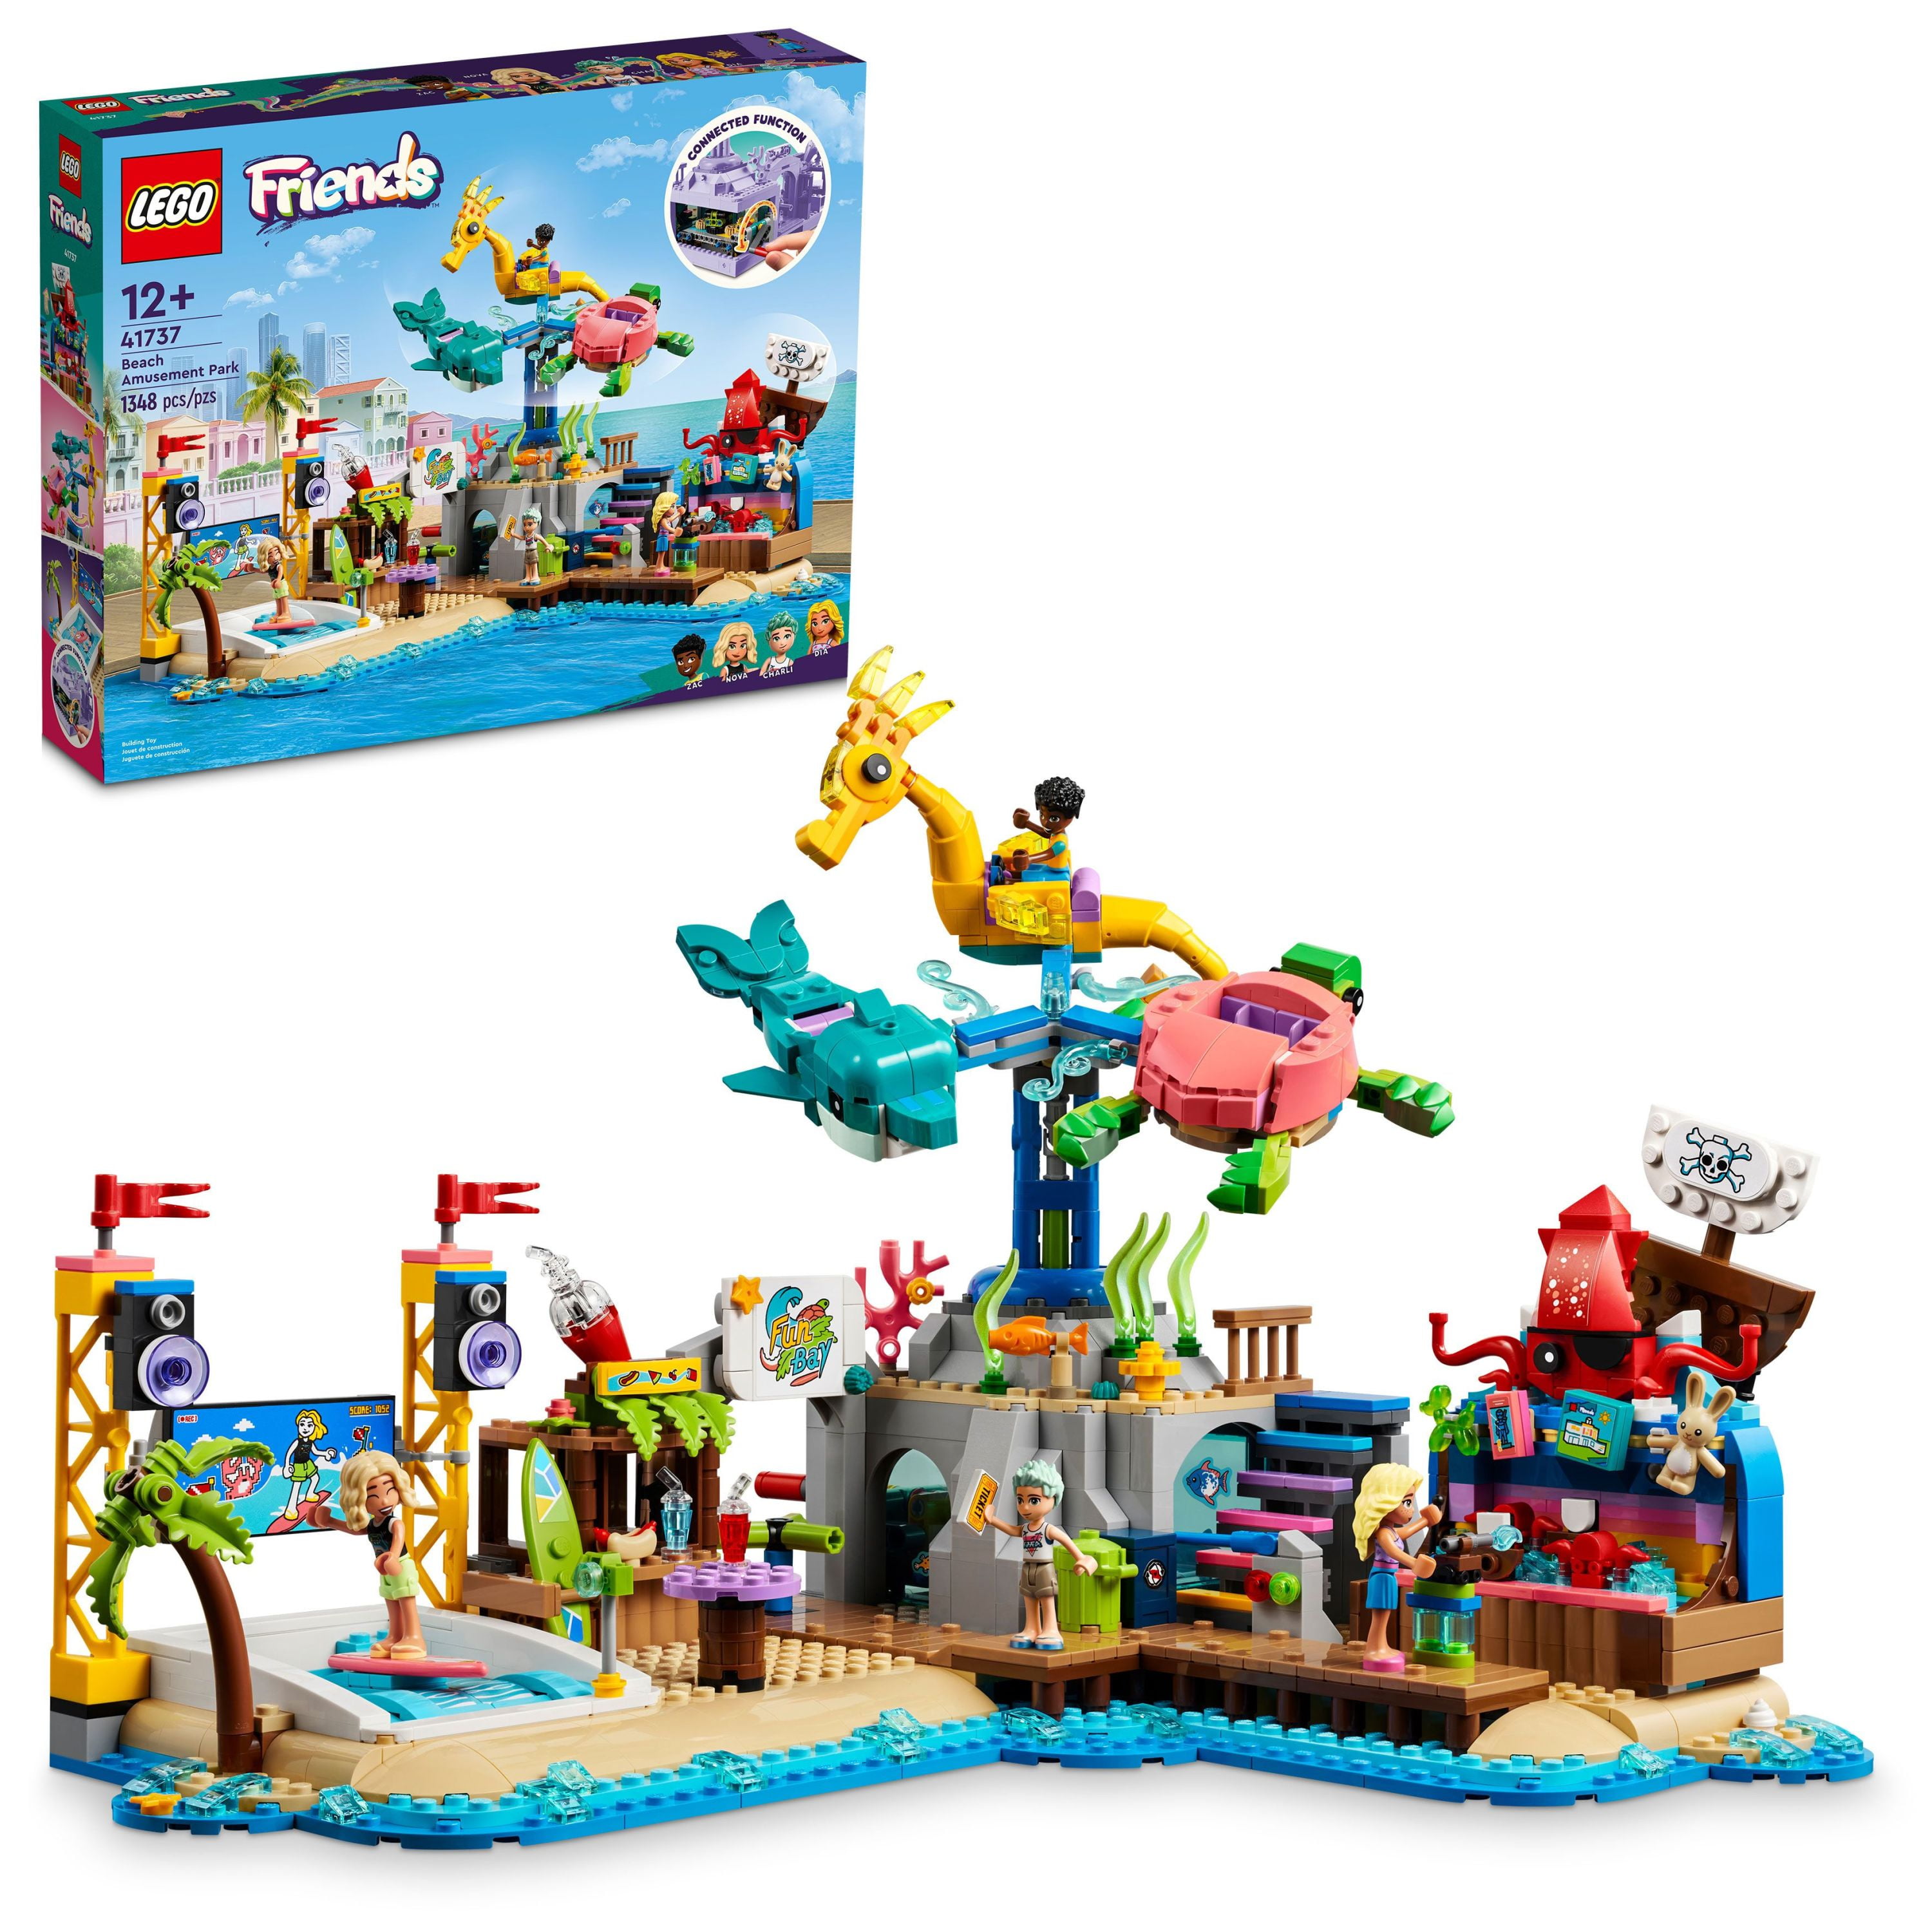  LEGO Creator 3 in 1 Space Roller Coaster Building Toy Set  Featuring a Roller Coaster, Drop Tower, Carousel and 5 Minifigures,  Rebuildable Amusement Park for Kids Ages 9+, 31142 : Toys & Games